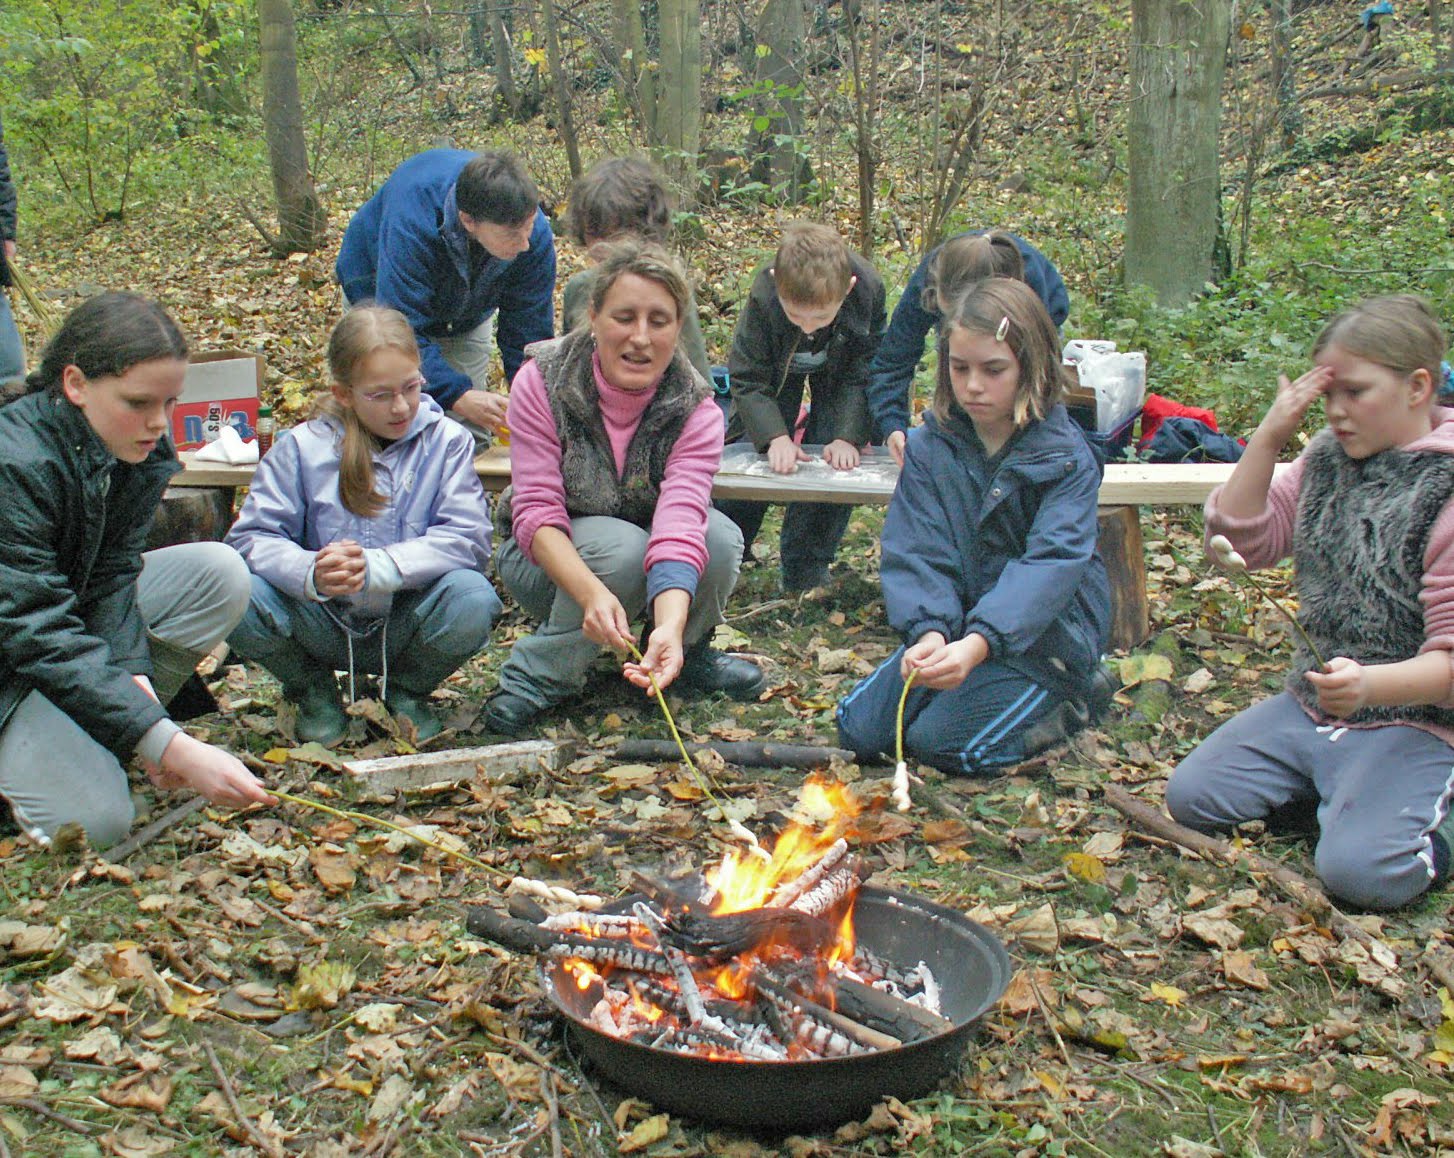 Download this Forest School picture